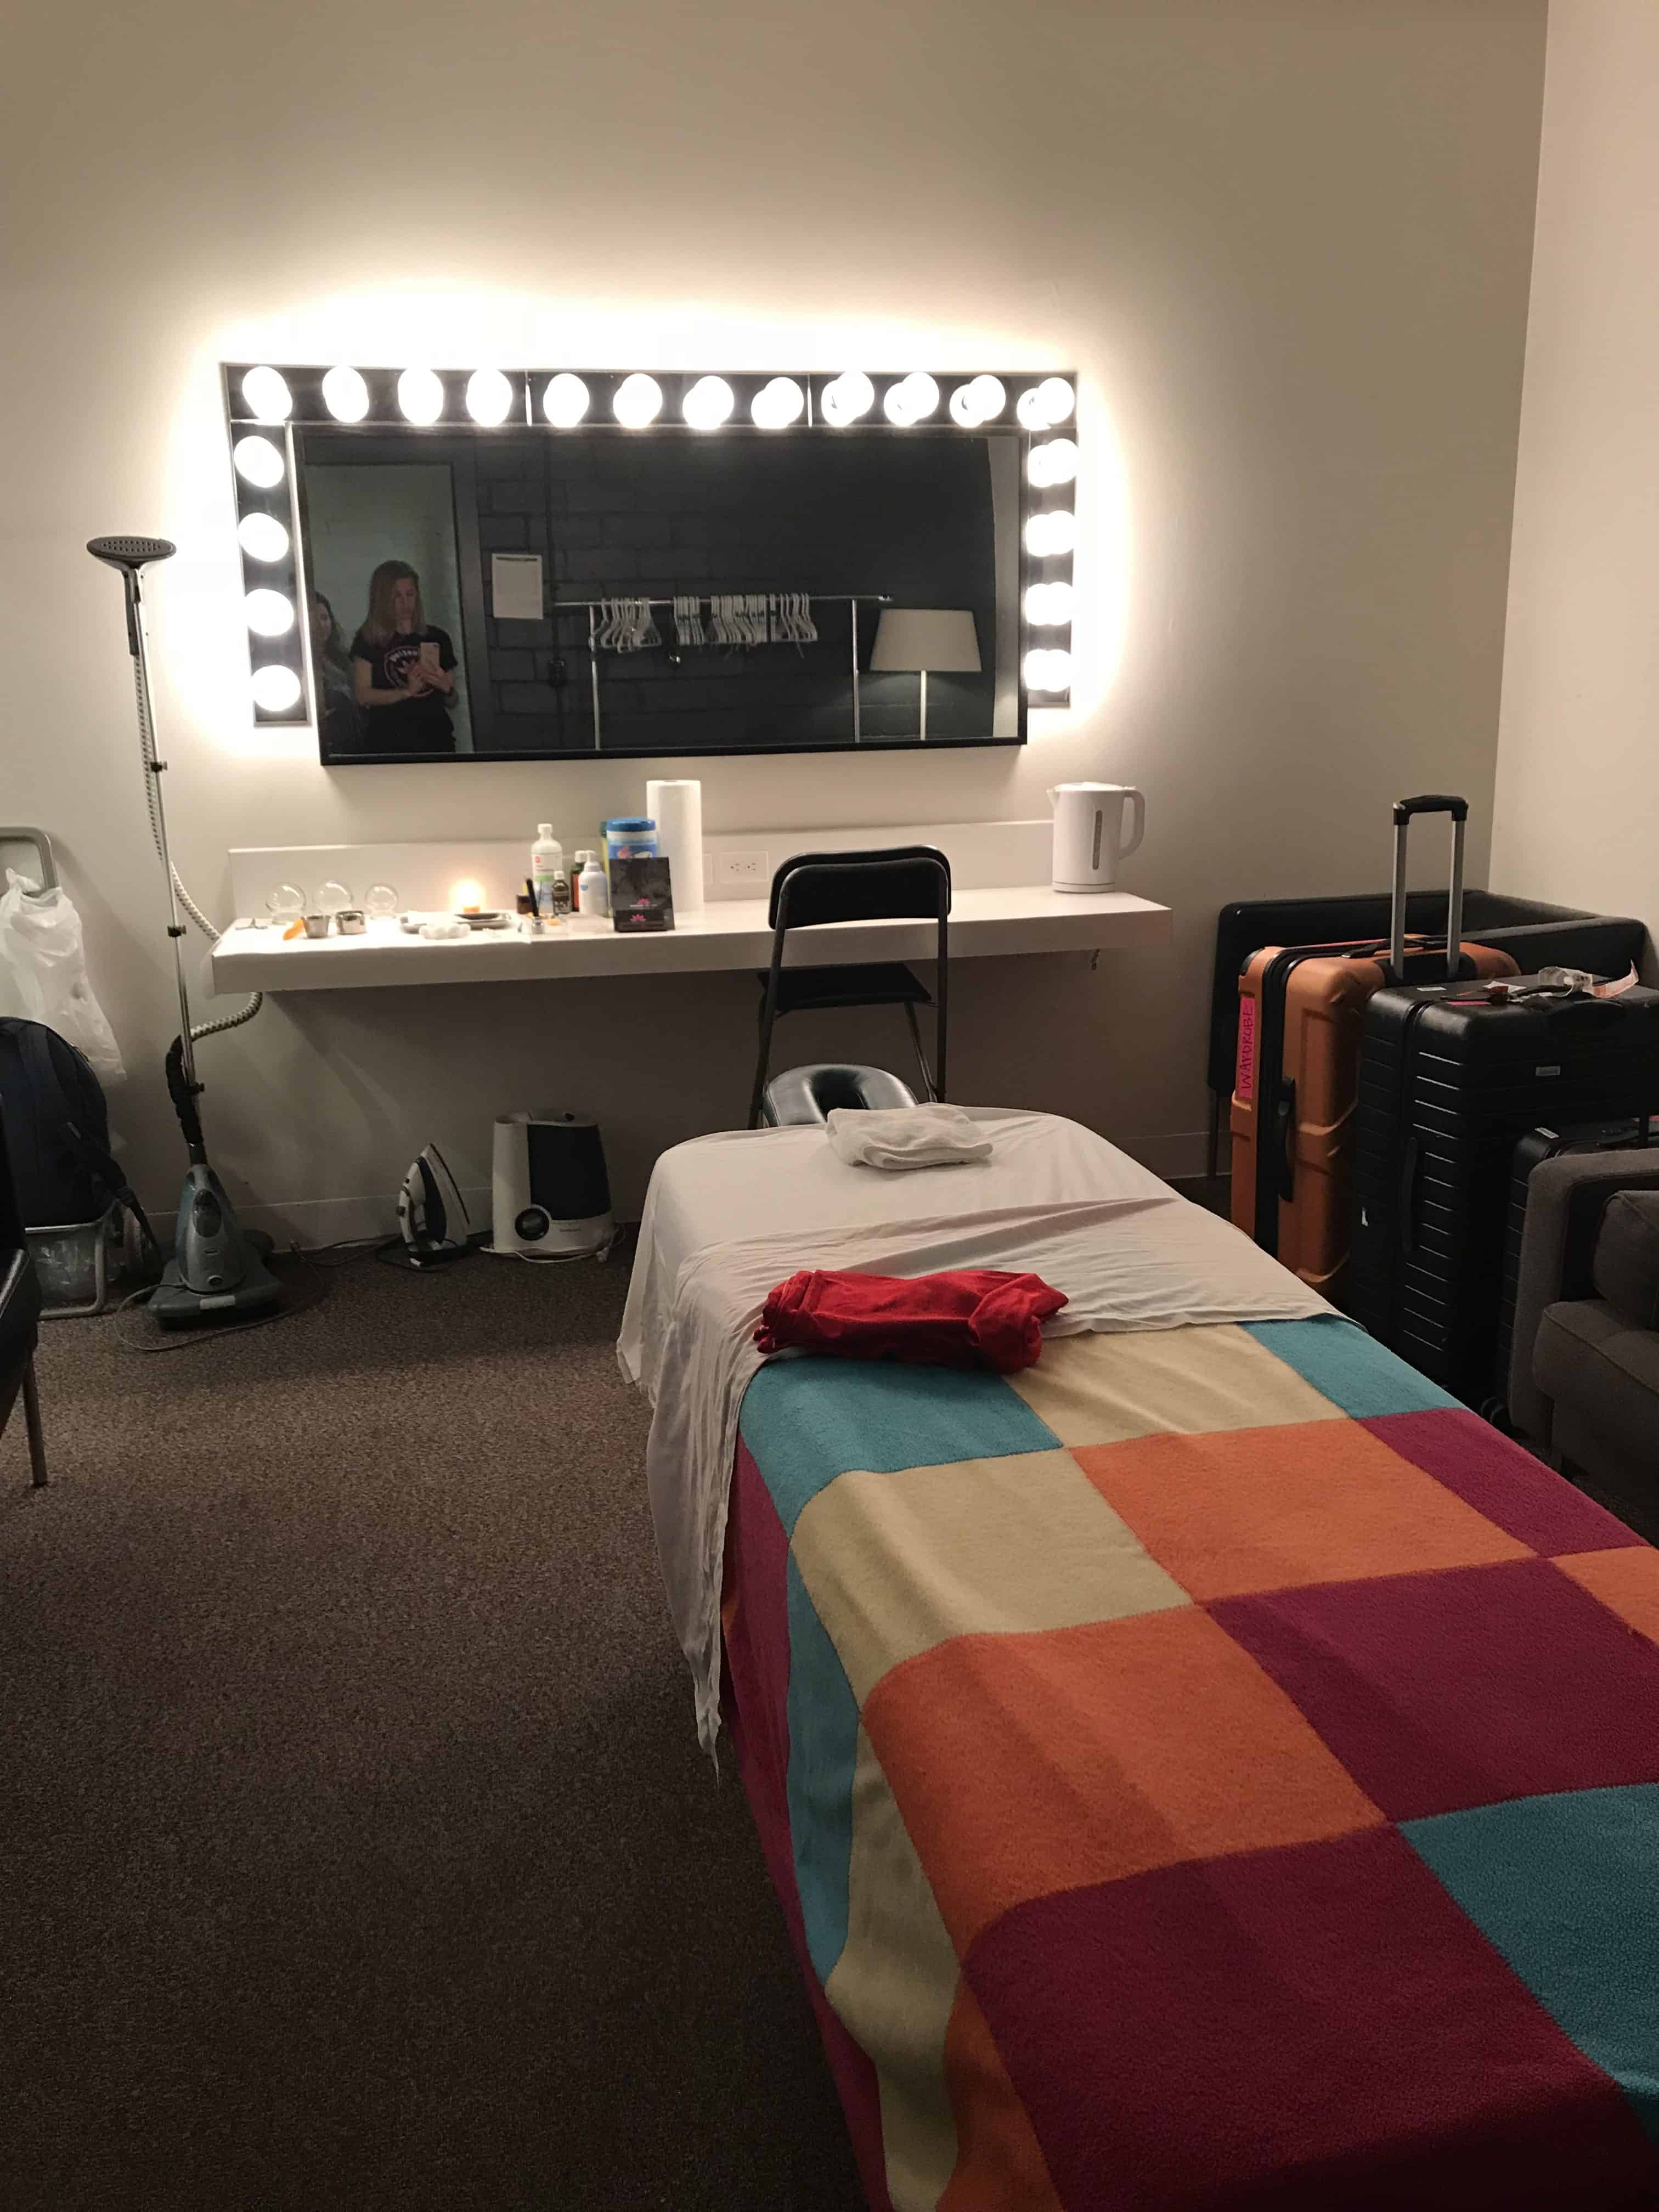 Replicating the best downtown acupuncture massage table clinic set up backstage at massey hall before the Haim concert